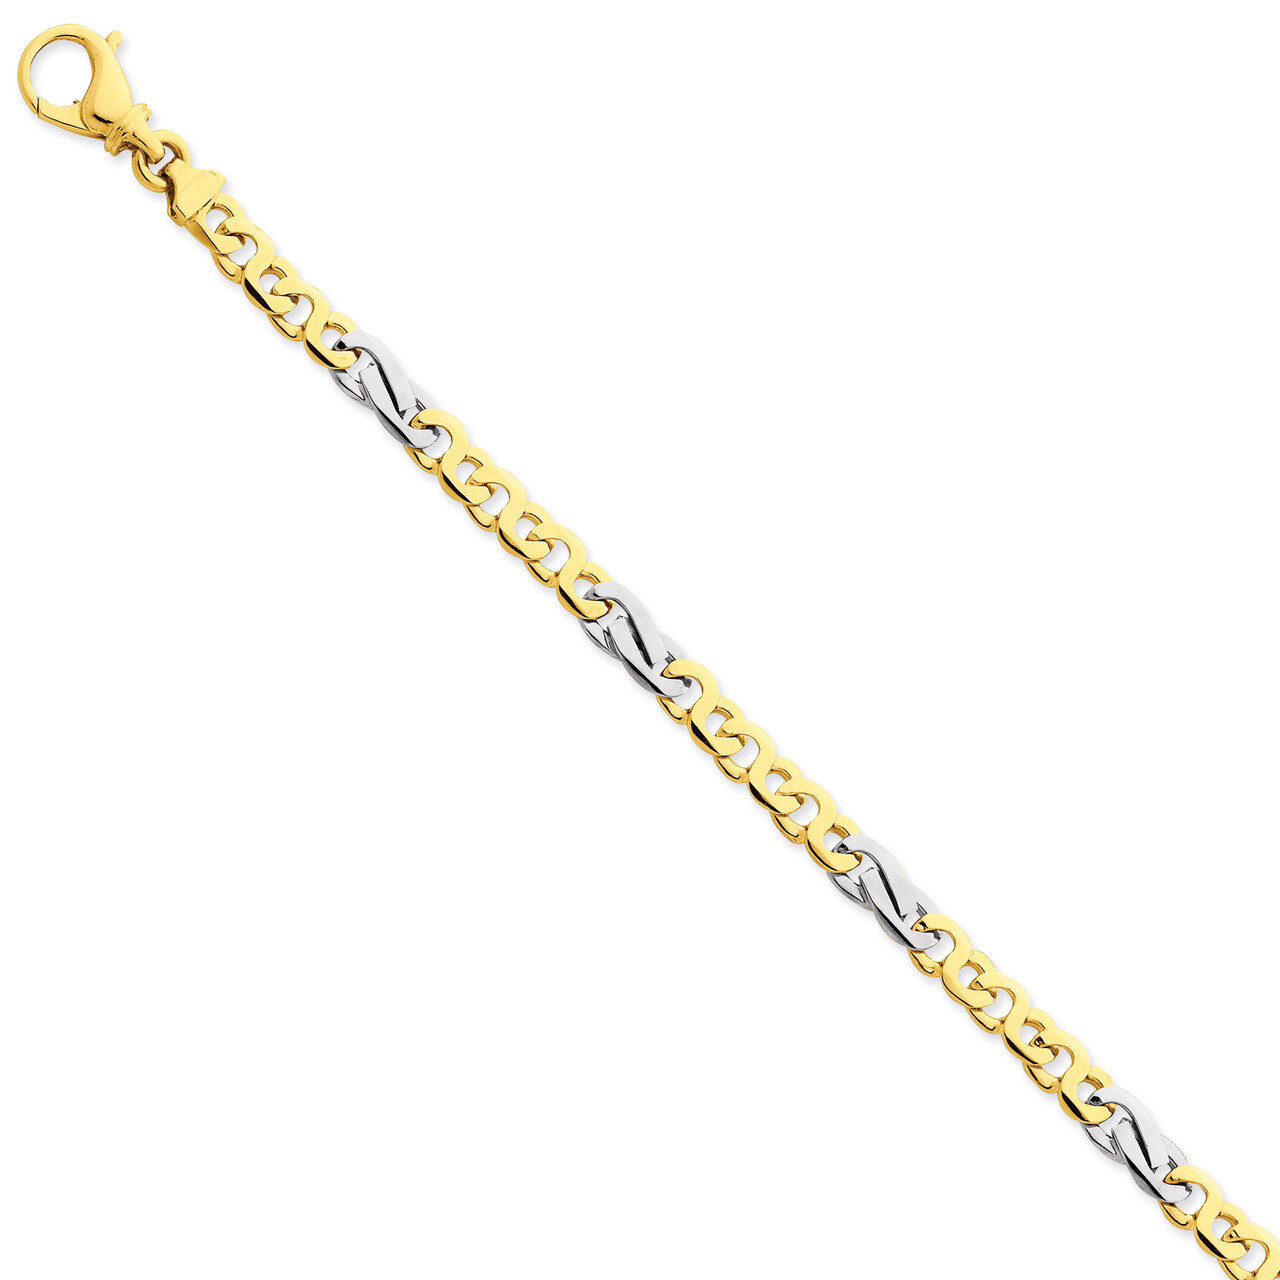 6.2mm Polished Fancy Link Chain 24 Inch 14k Two-Tone Gold LK523-24